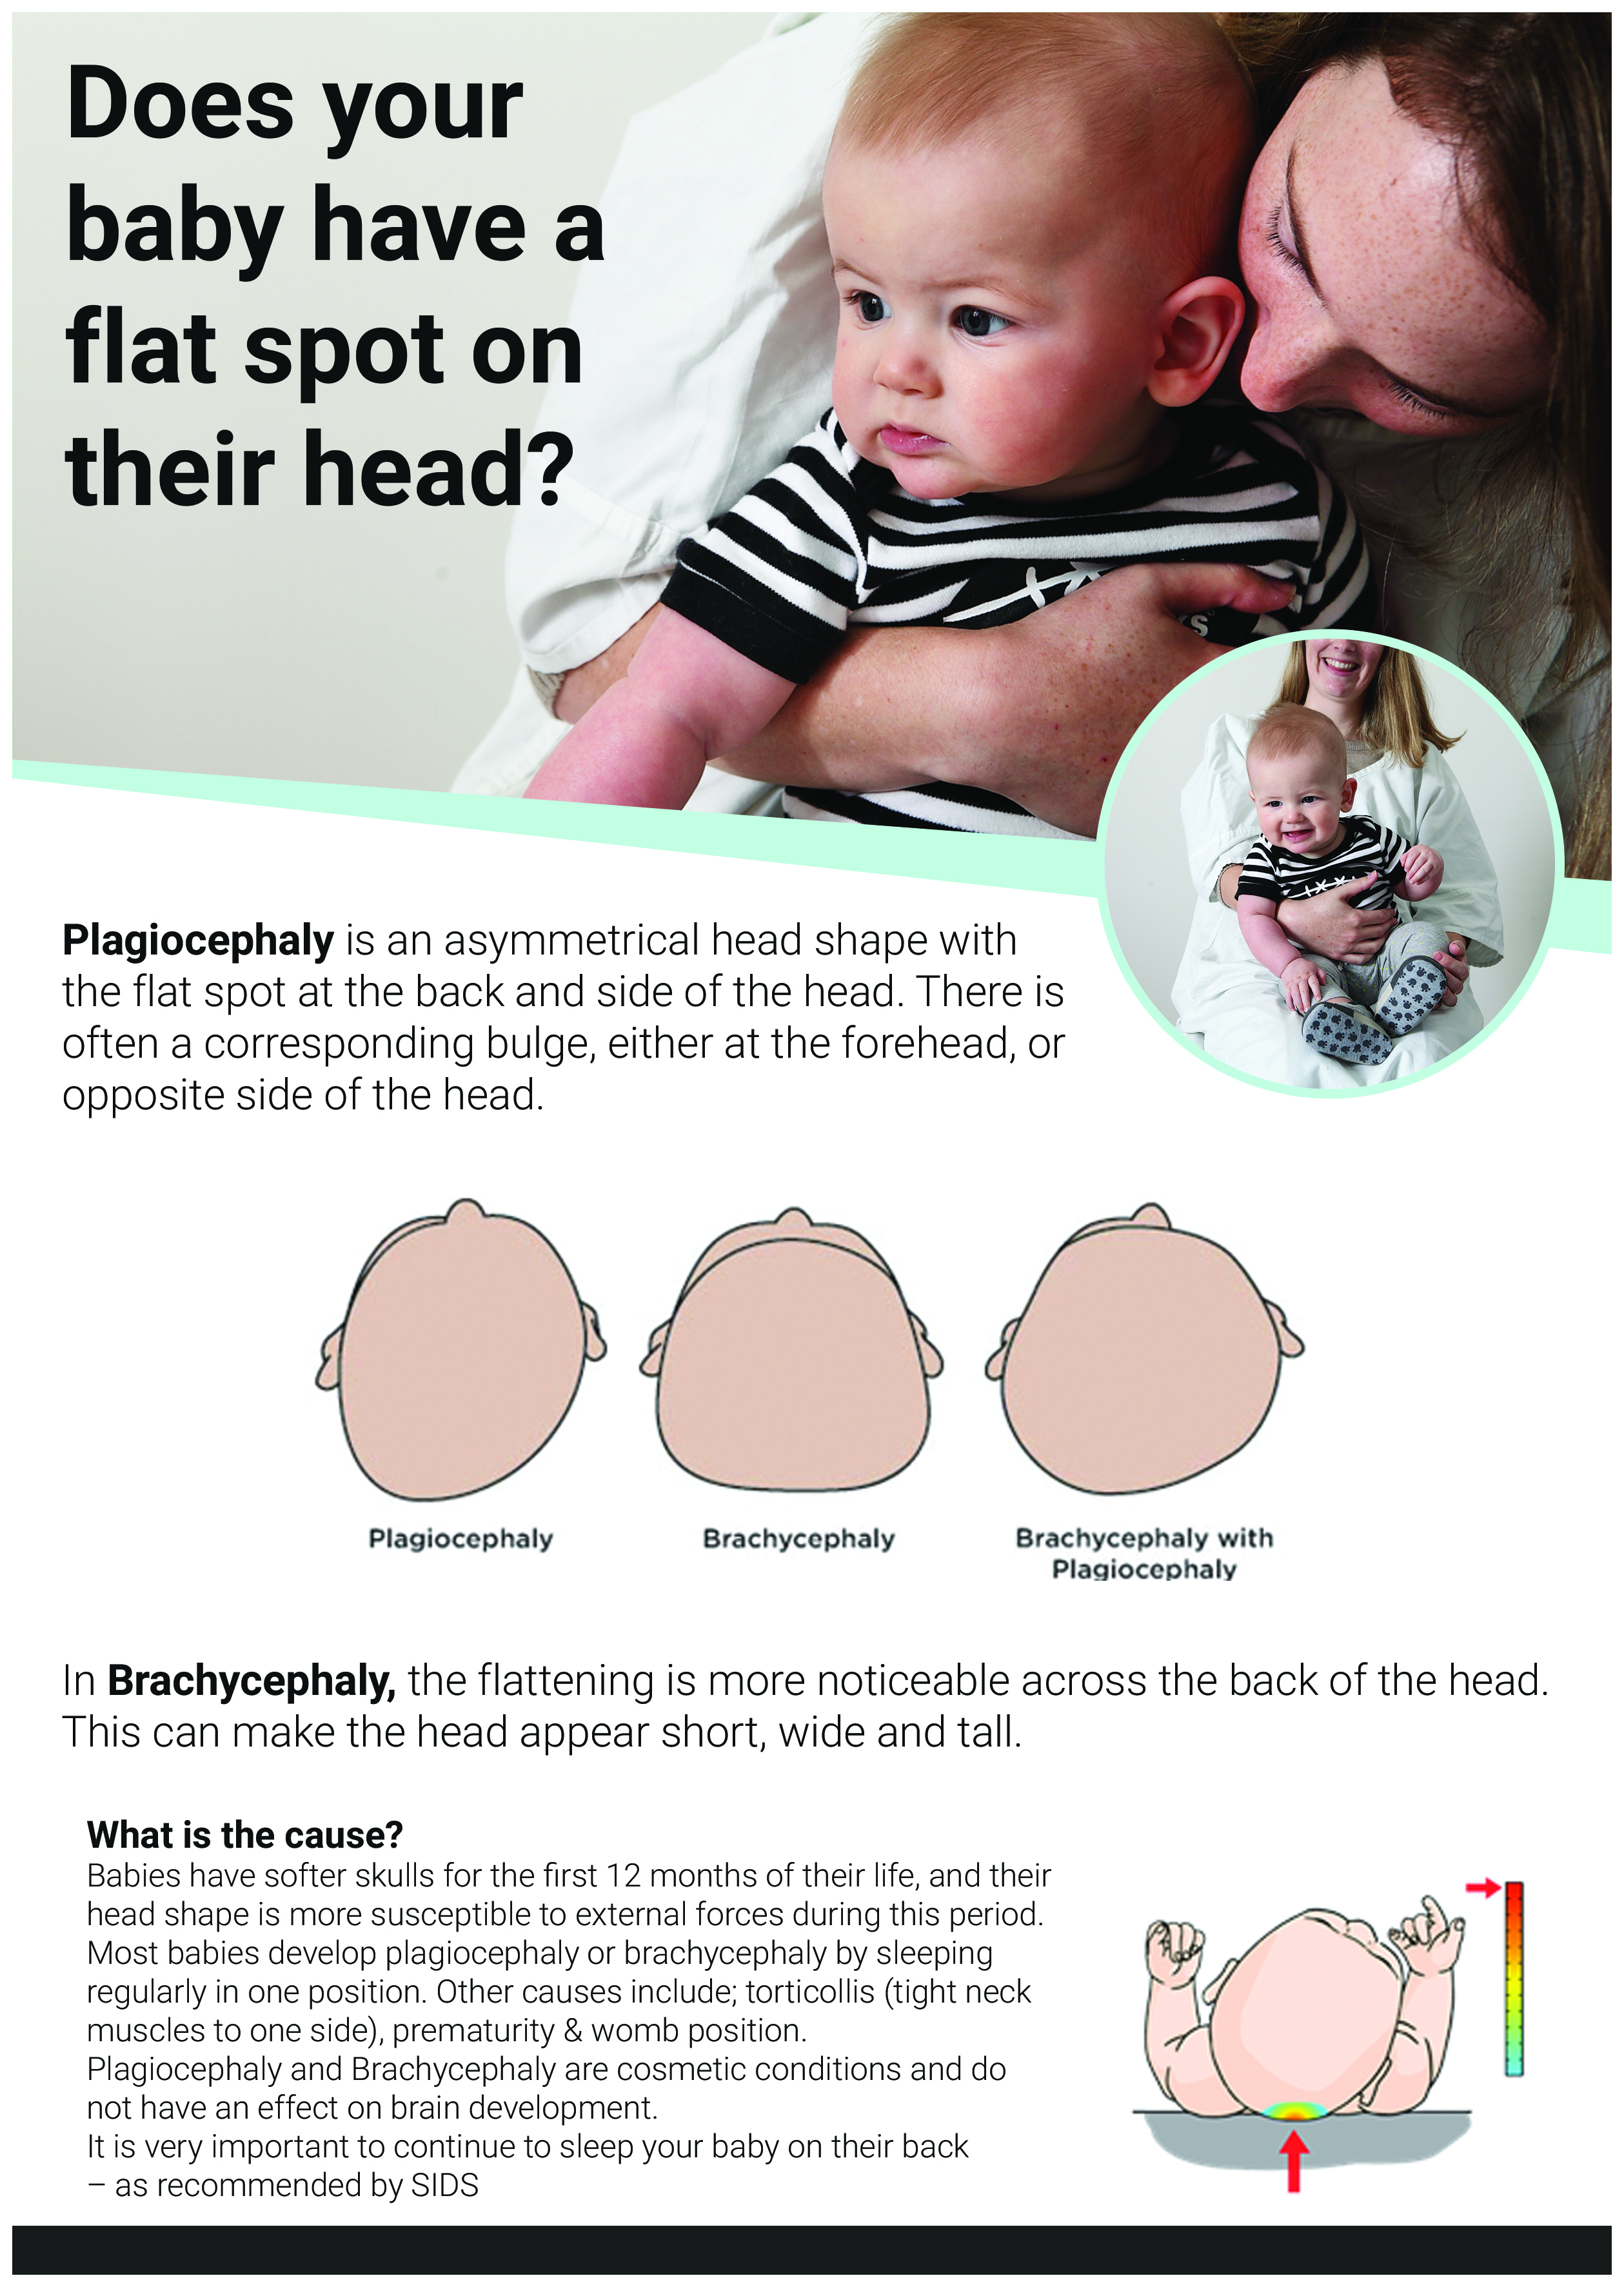 front orthokids flyer does your baby have a flat spot on their head 2017 wfwwahe